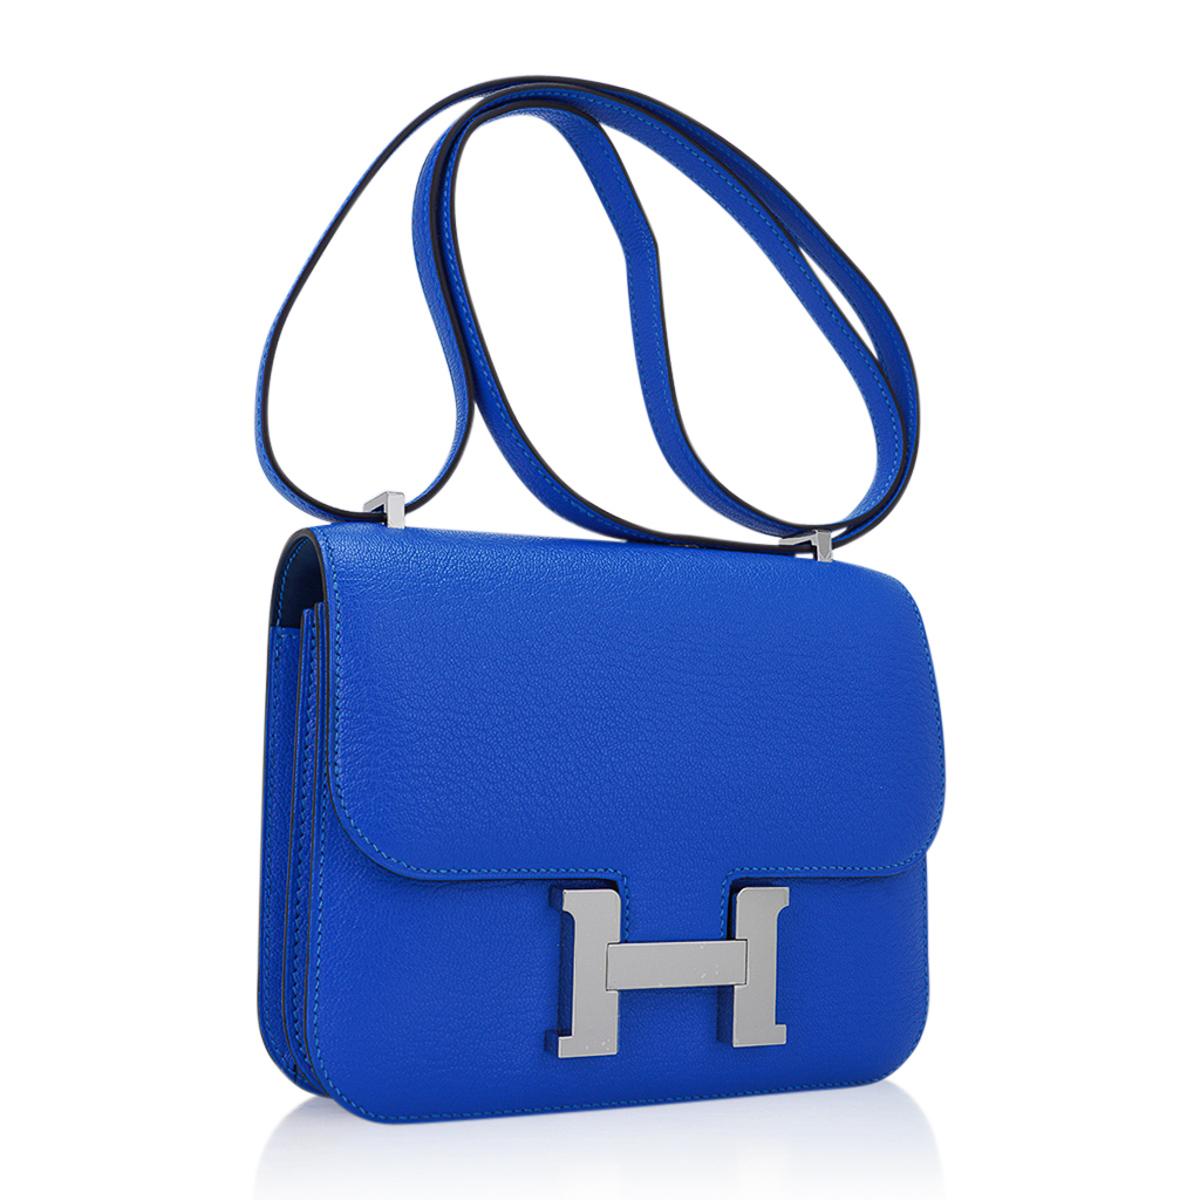 Mightychic offers an Hermes Constance 18 bag featured in Bleu Hydra with Deep Bleu interior.
Chevre leather has a natural exotic grain and its rich saturated highlights the colour to stunning effect.
Accentuated with Palladium hardware.
HERMES PARIS